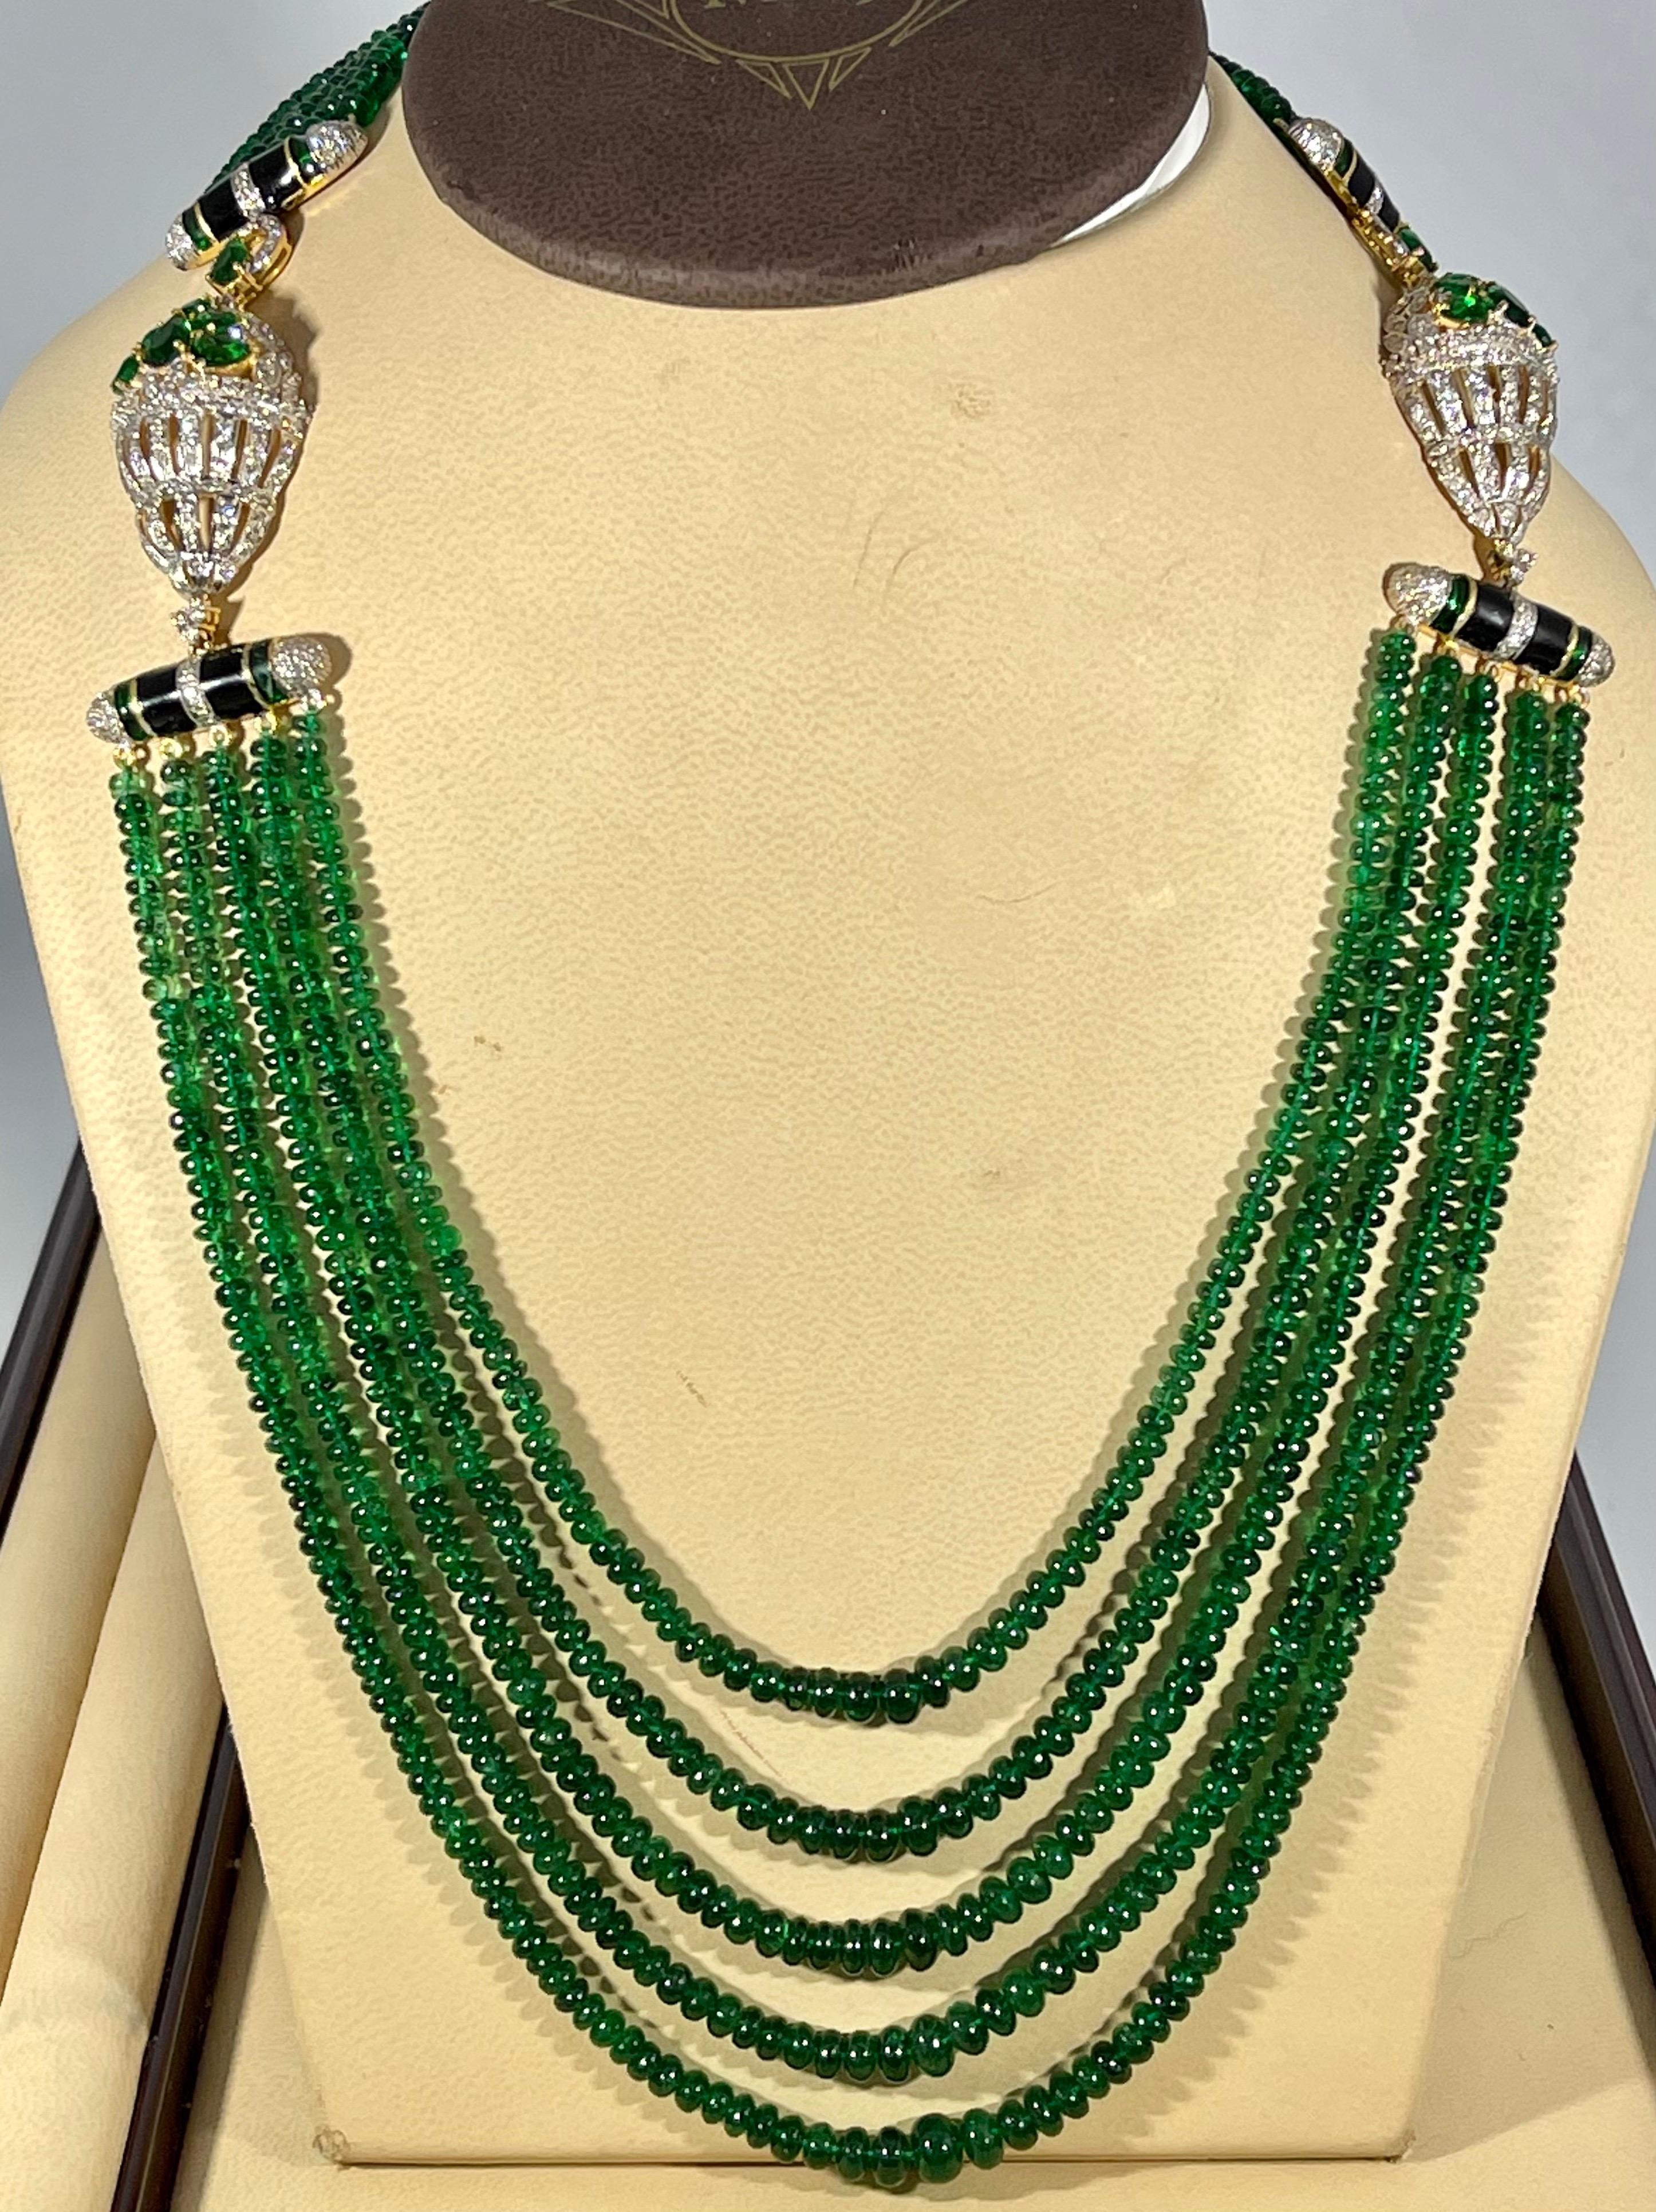 335 Carat 5-Strand Emerald Necklace with 6.5 Carat Diamond & Enamel in 14k Gold For Sale 4